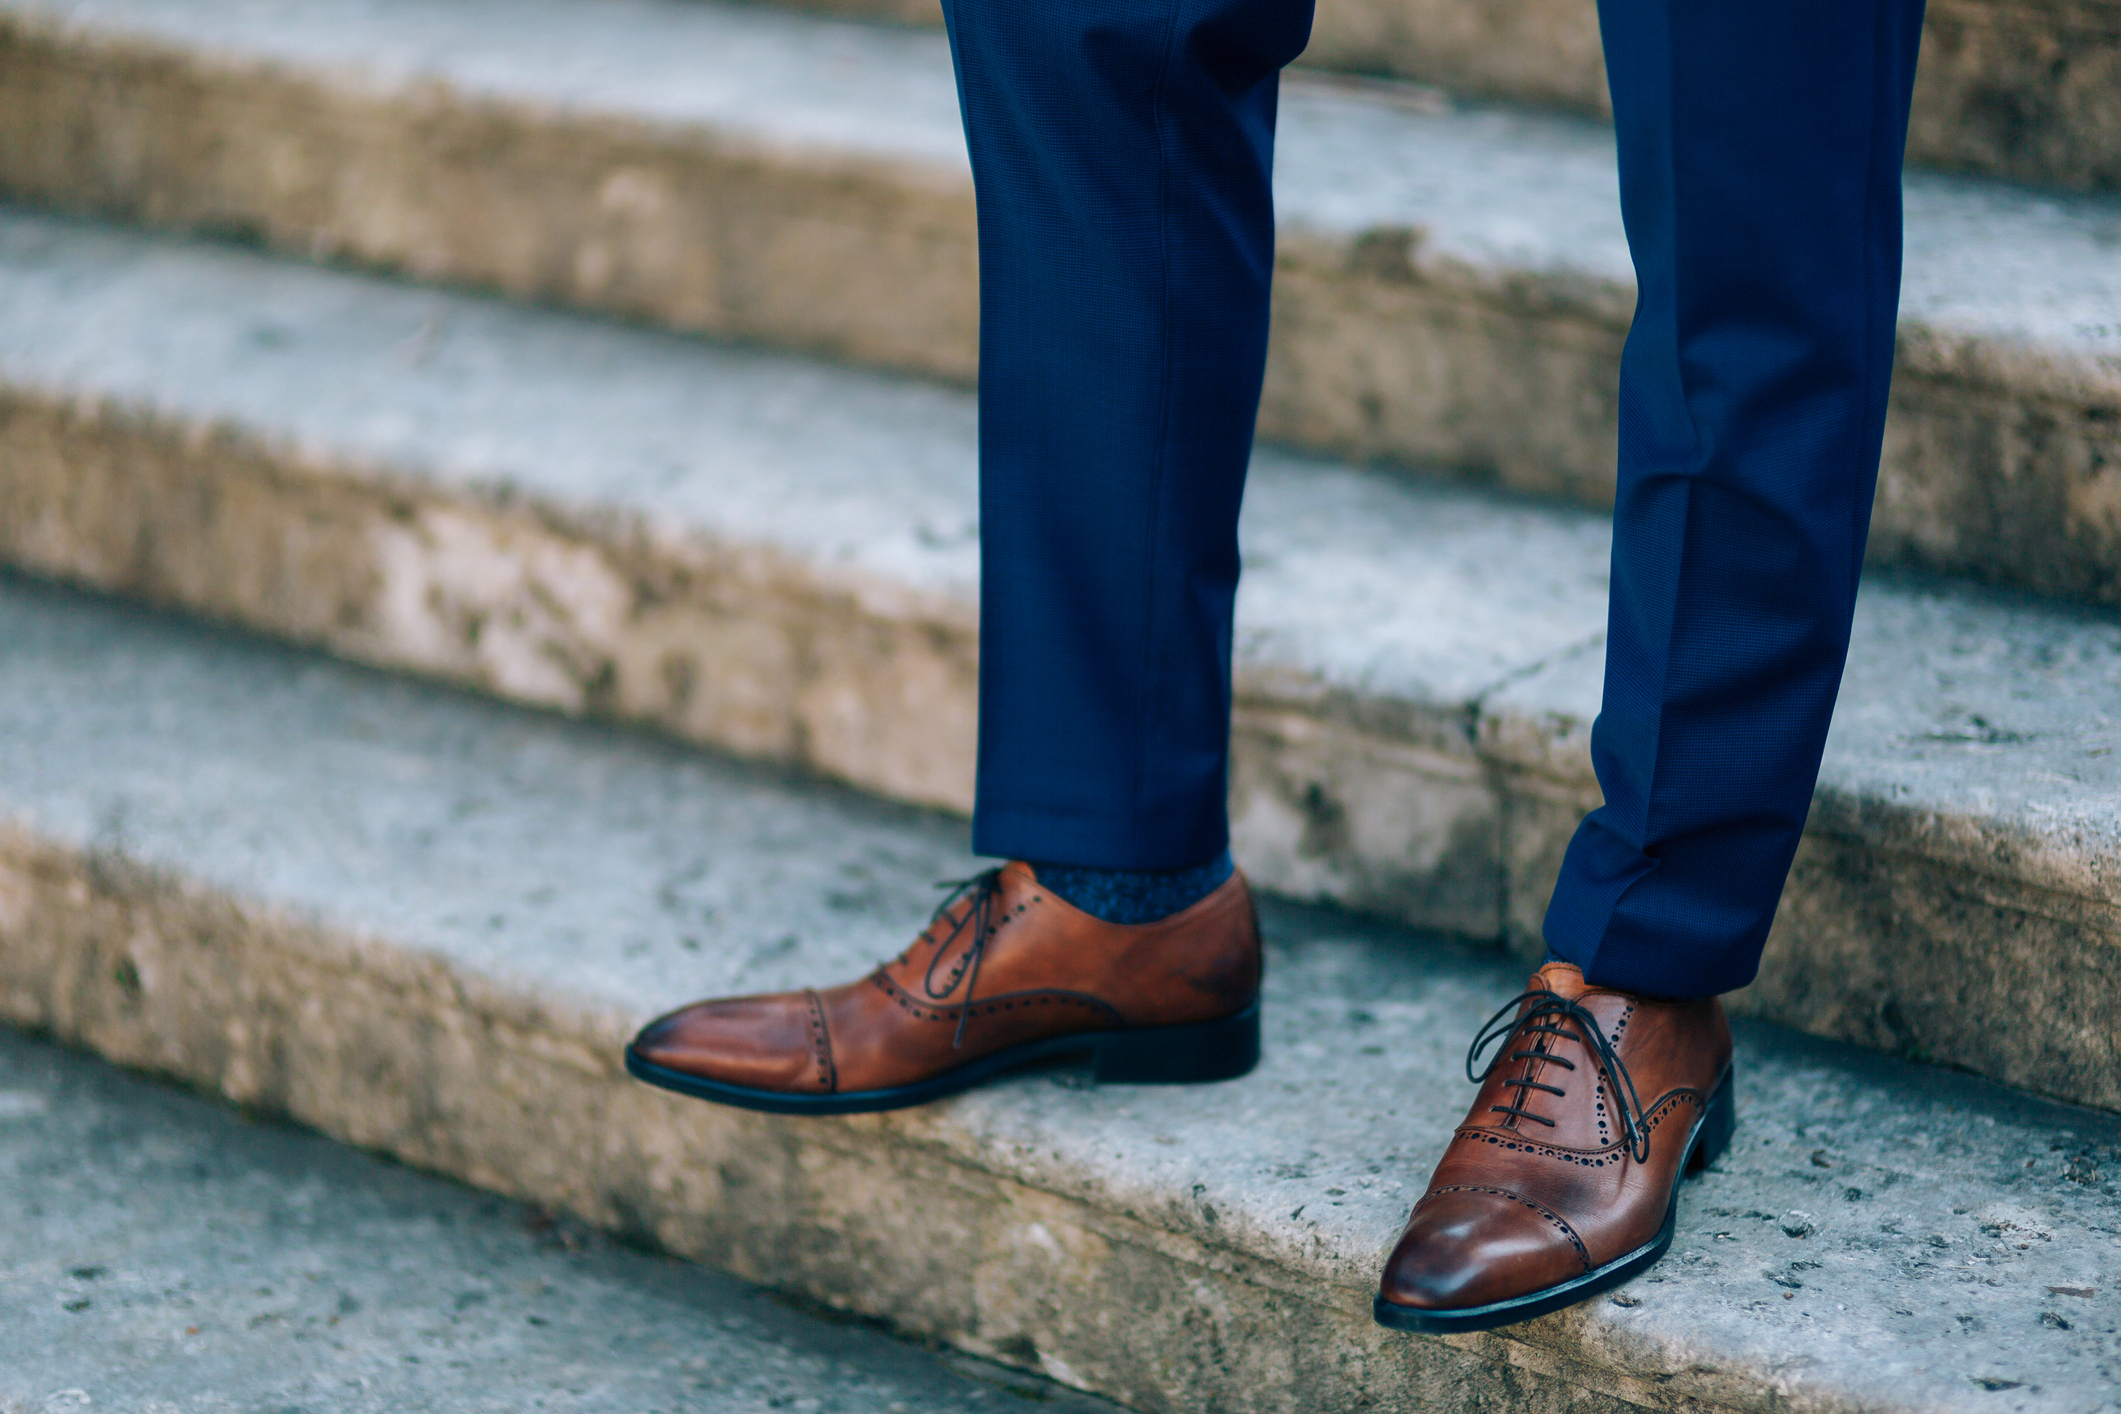 match your shoes to your suit